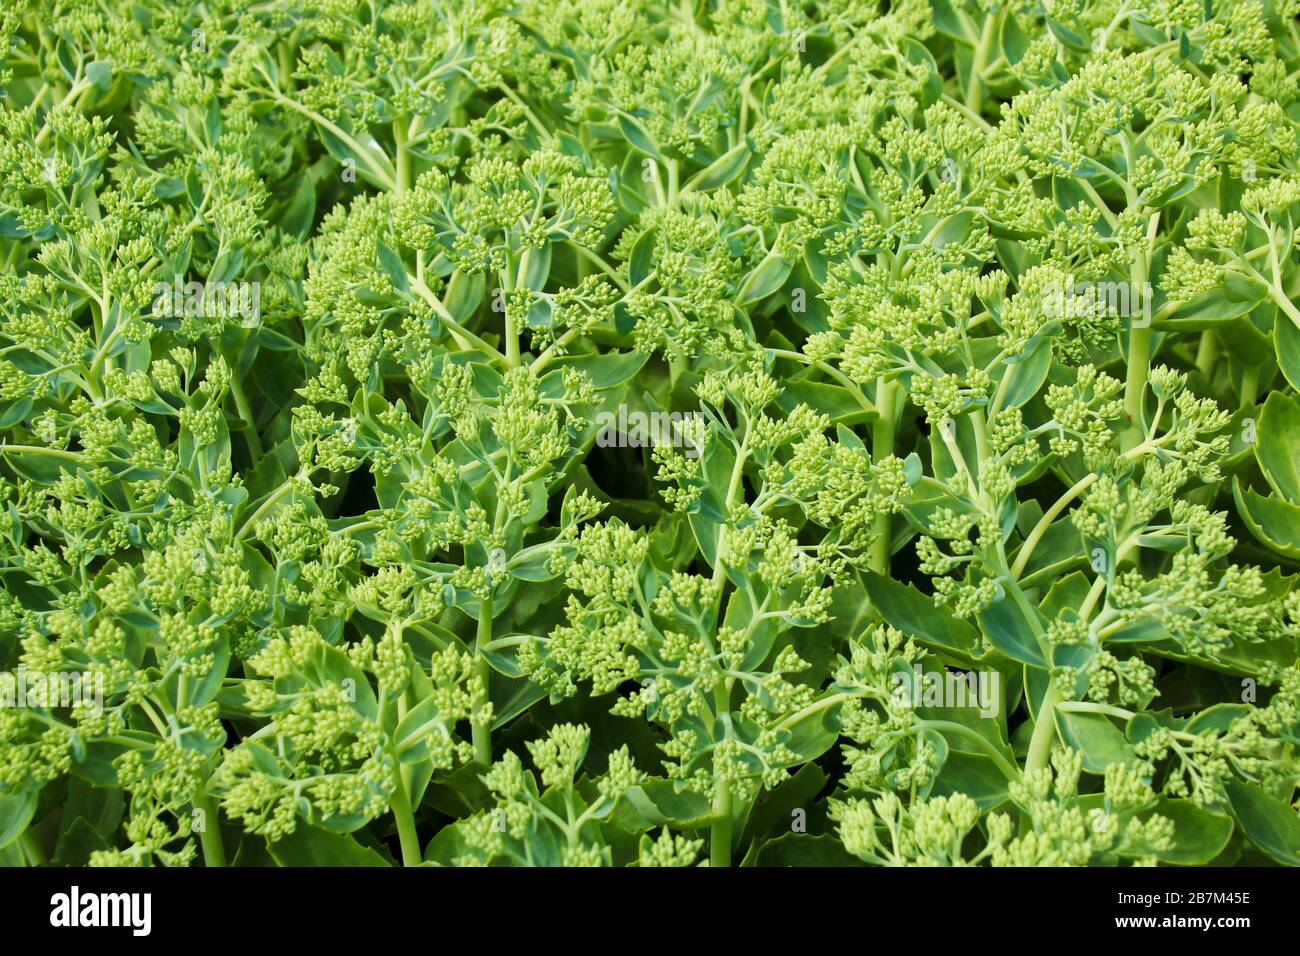 Close up of Sedum or Stonecrop hardy succulent ground cover perennial plant with clusters of closed dark green buds surrounded with thick leaves Stock Photo